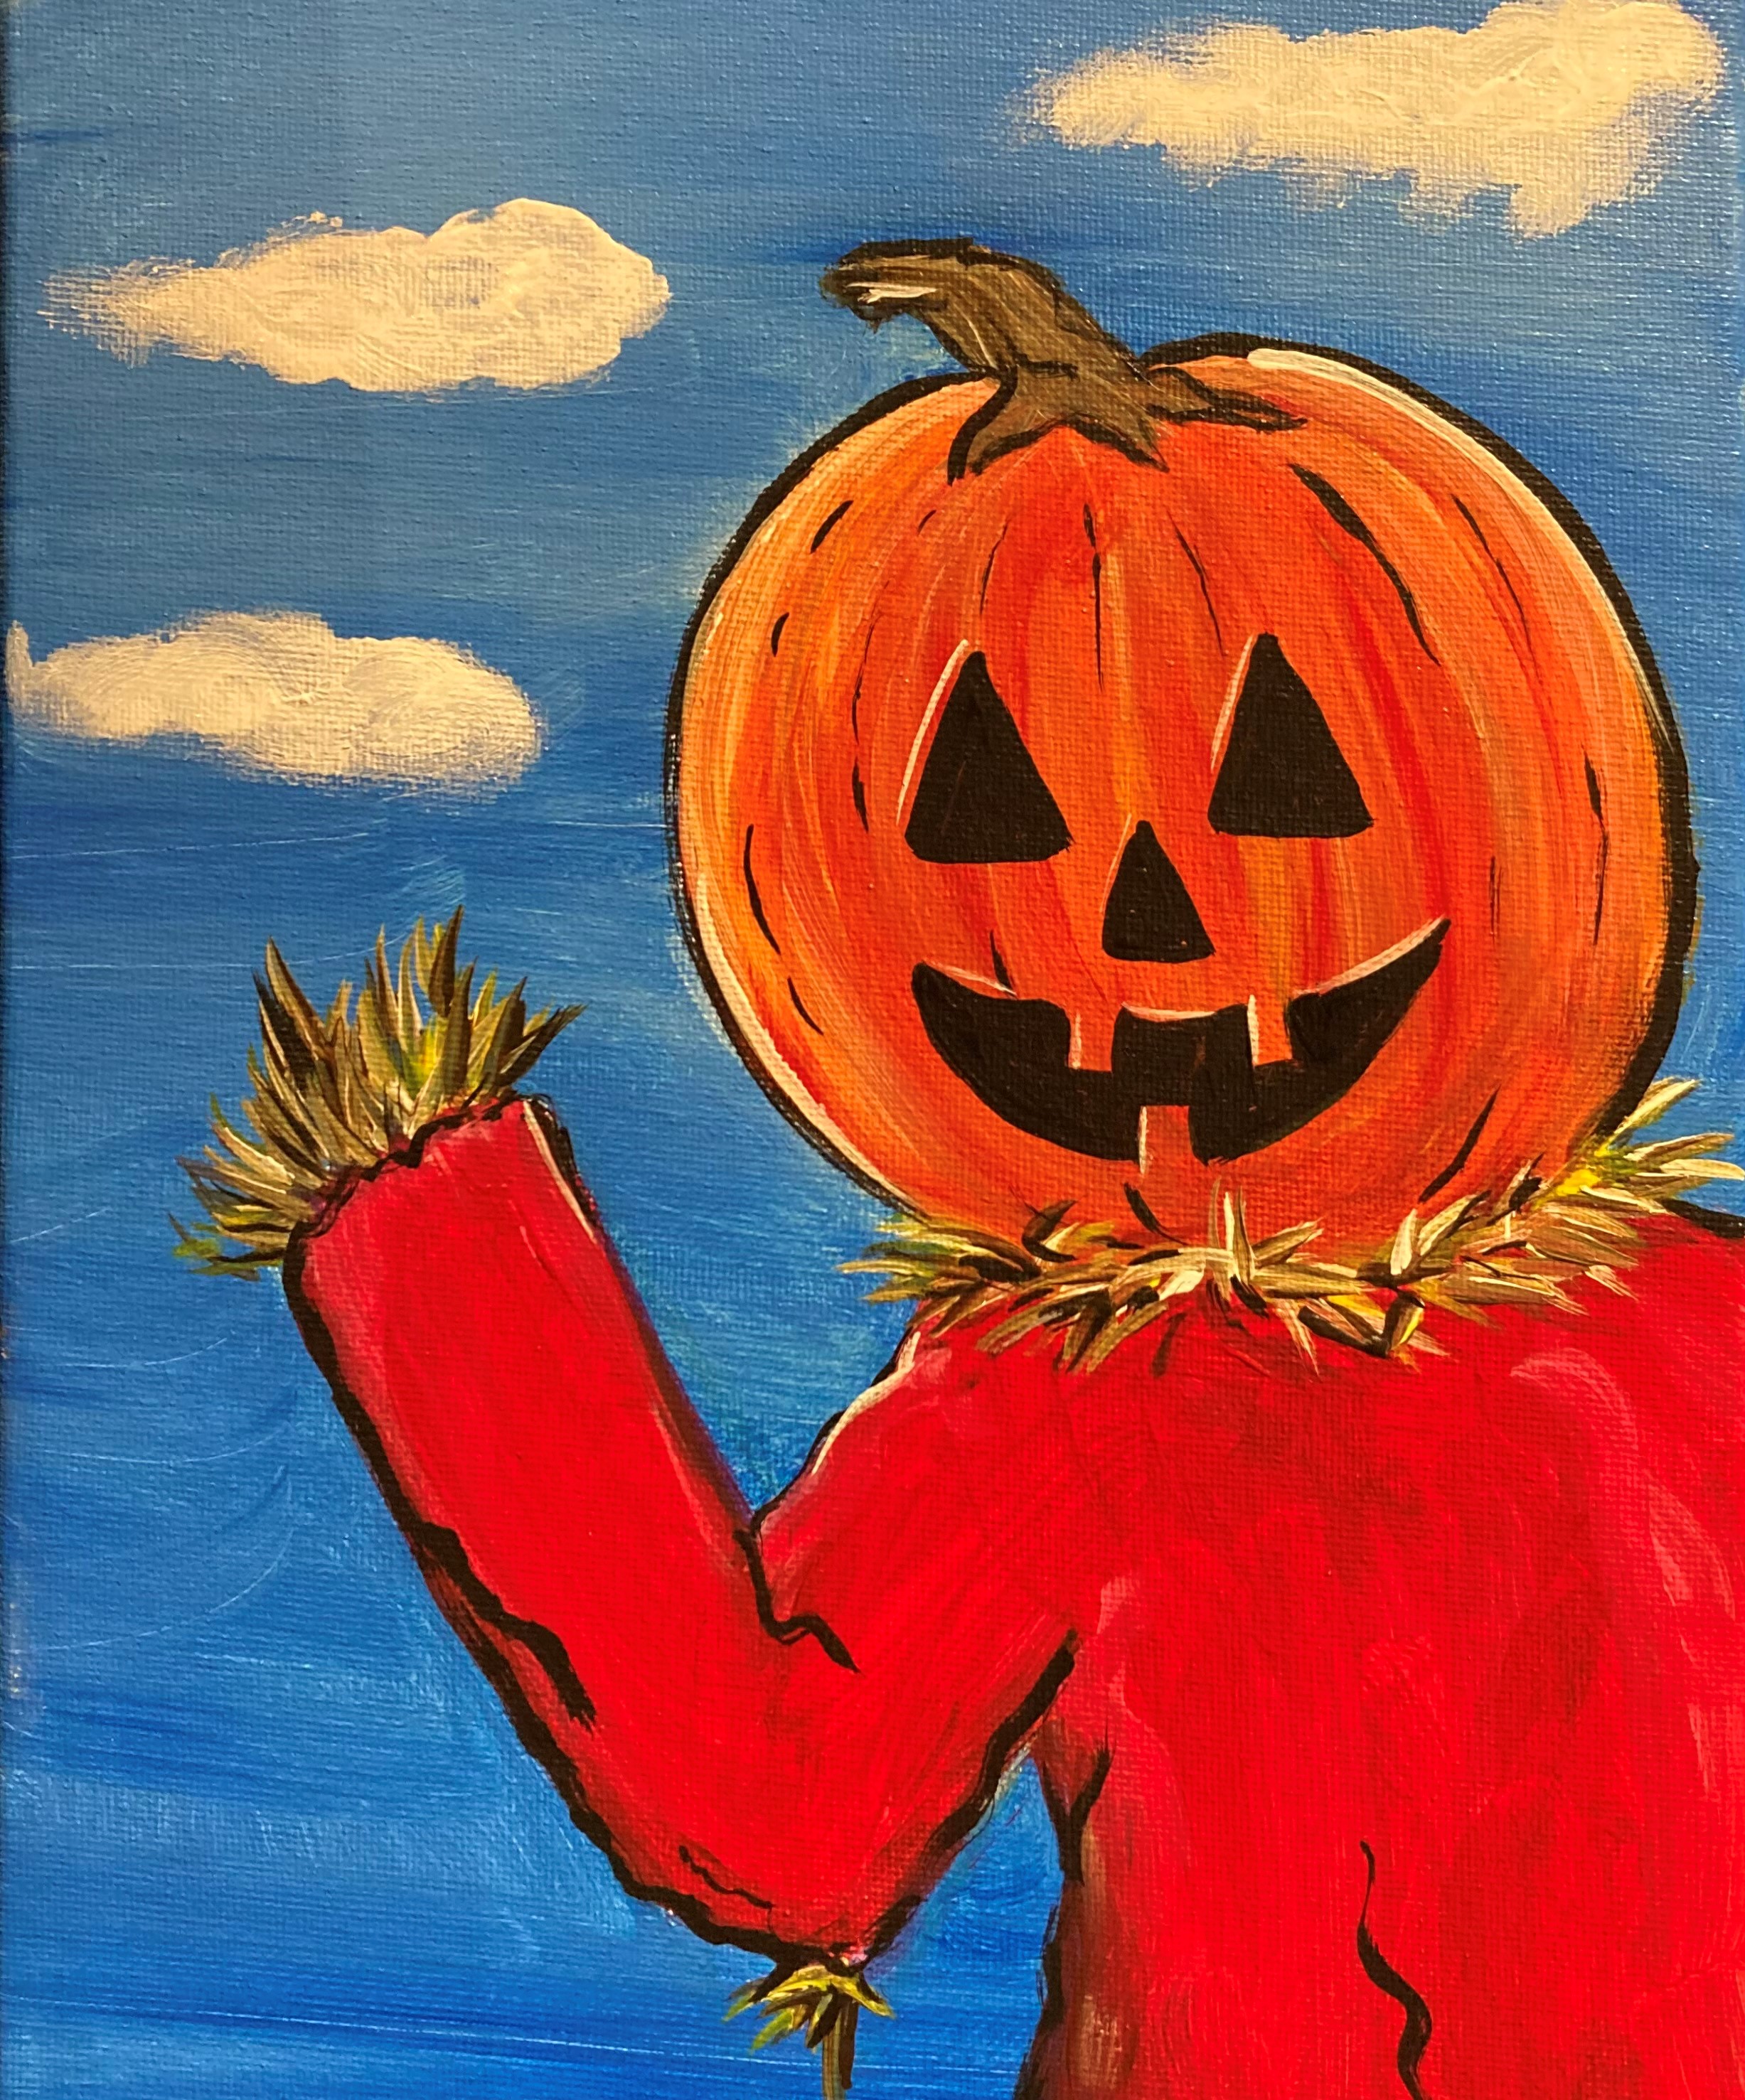 Friendly Scarecrow Paint-at-Home Kits - Oct 8-10